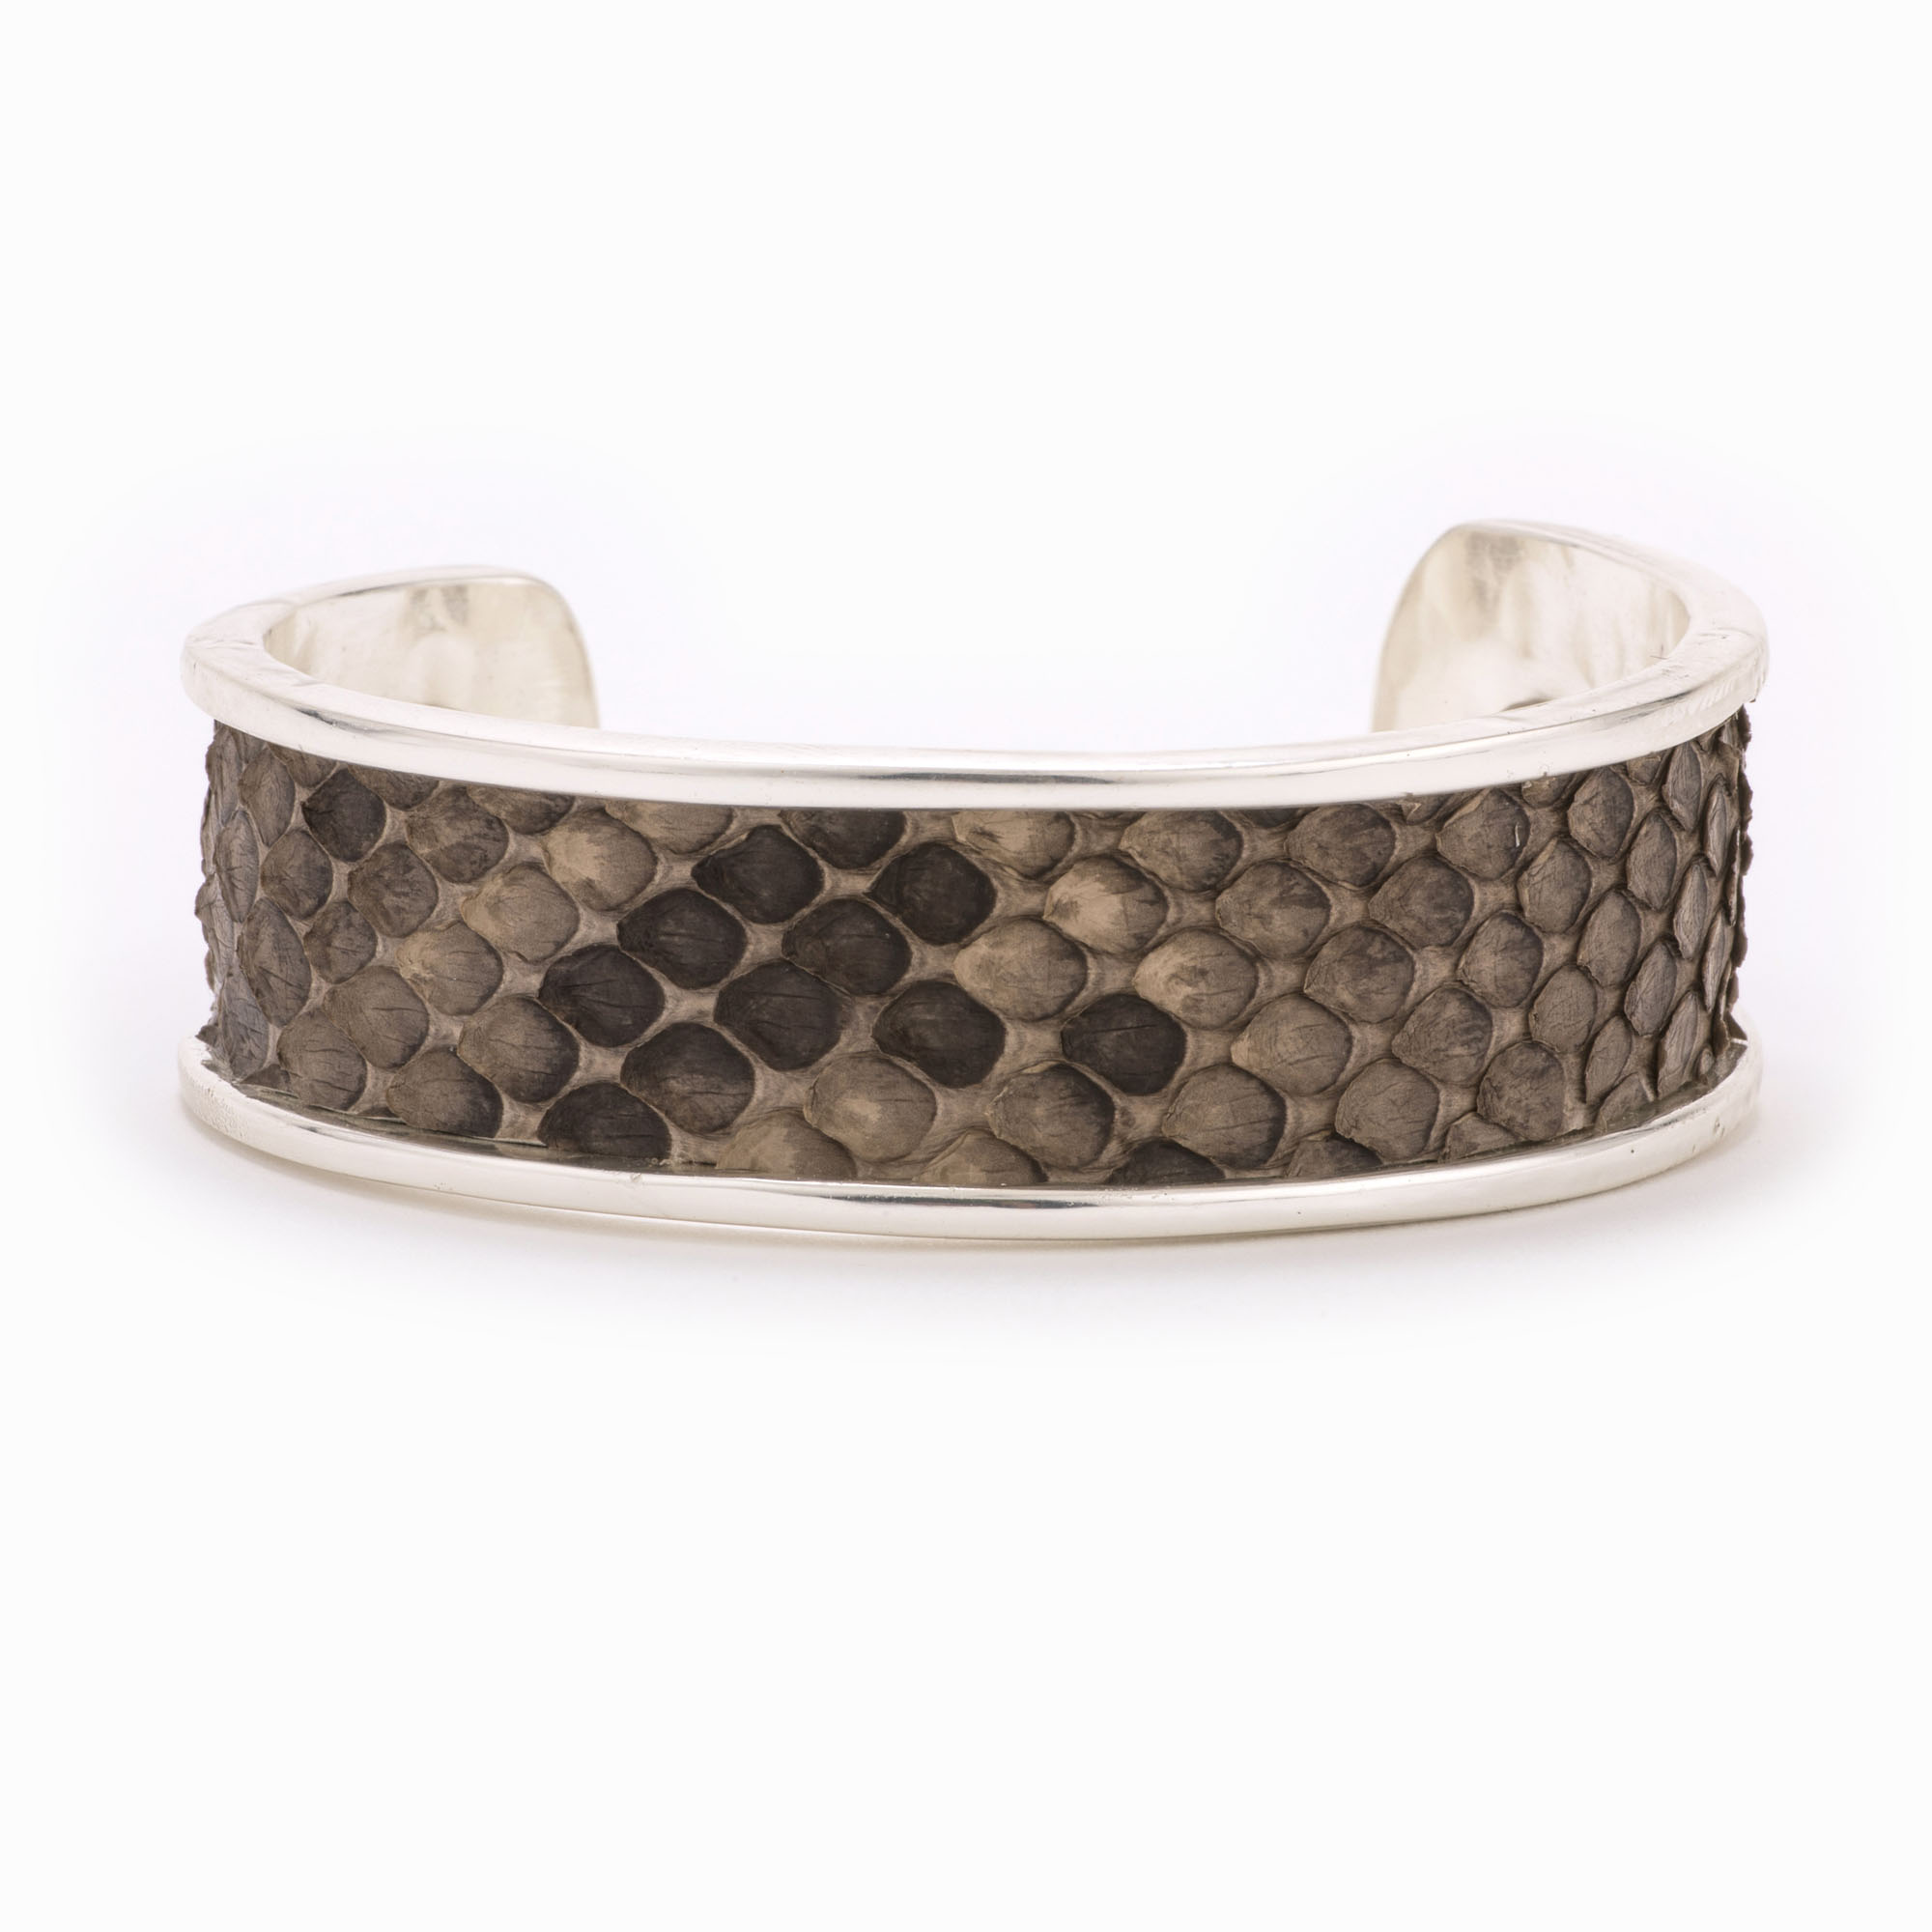 Featured image for “Medium Grey & Brown Silver Cuff”